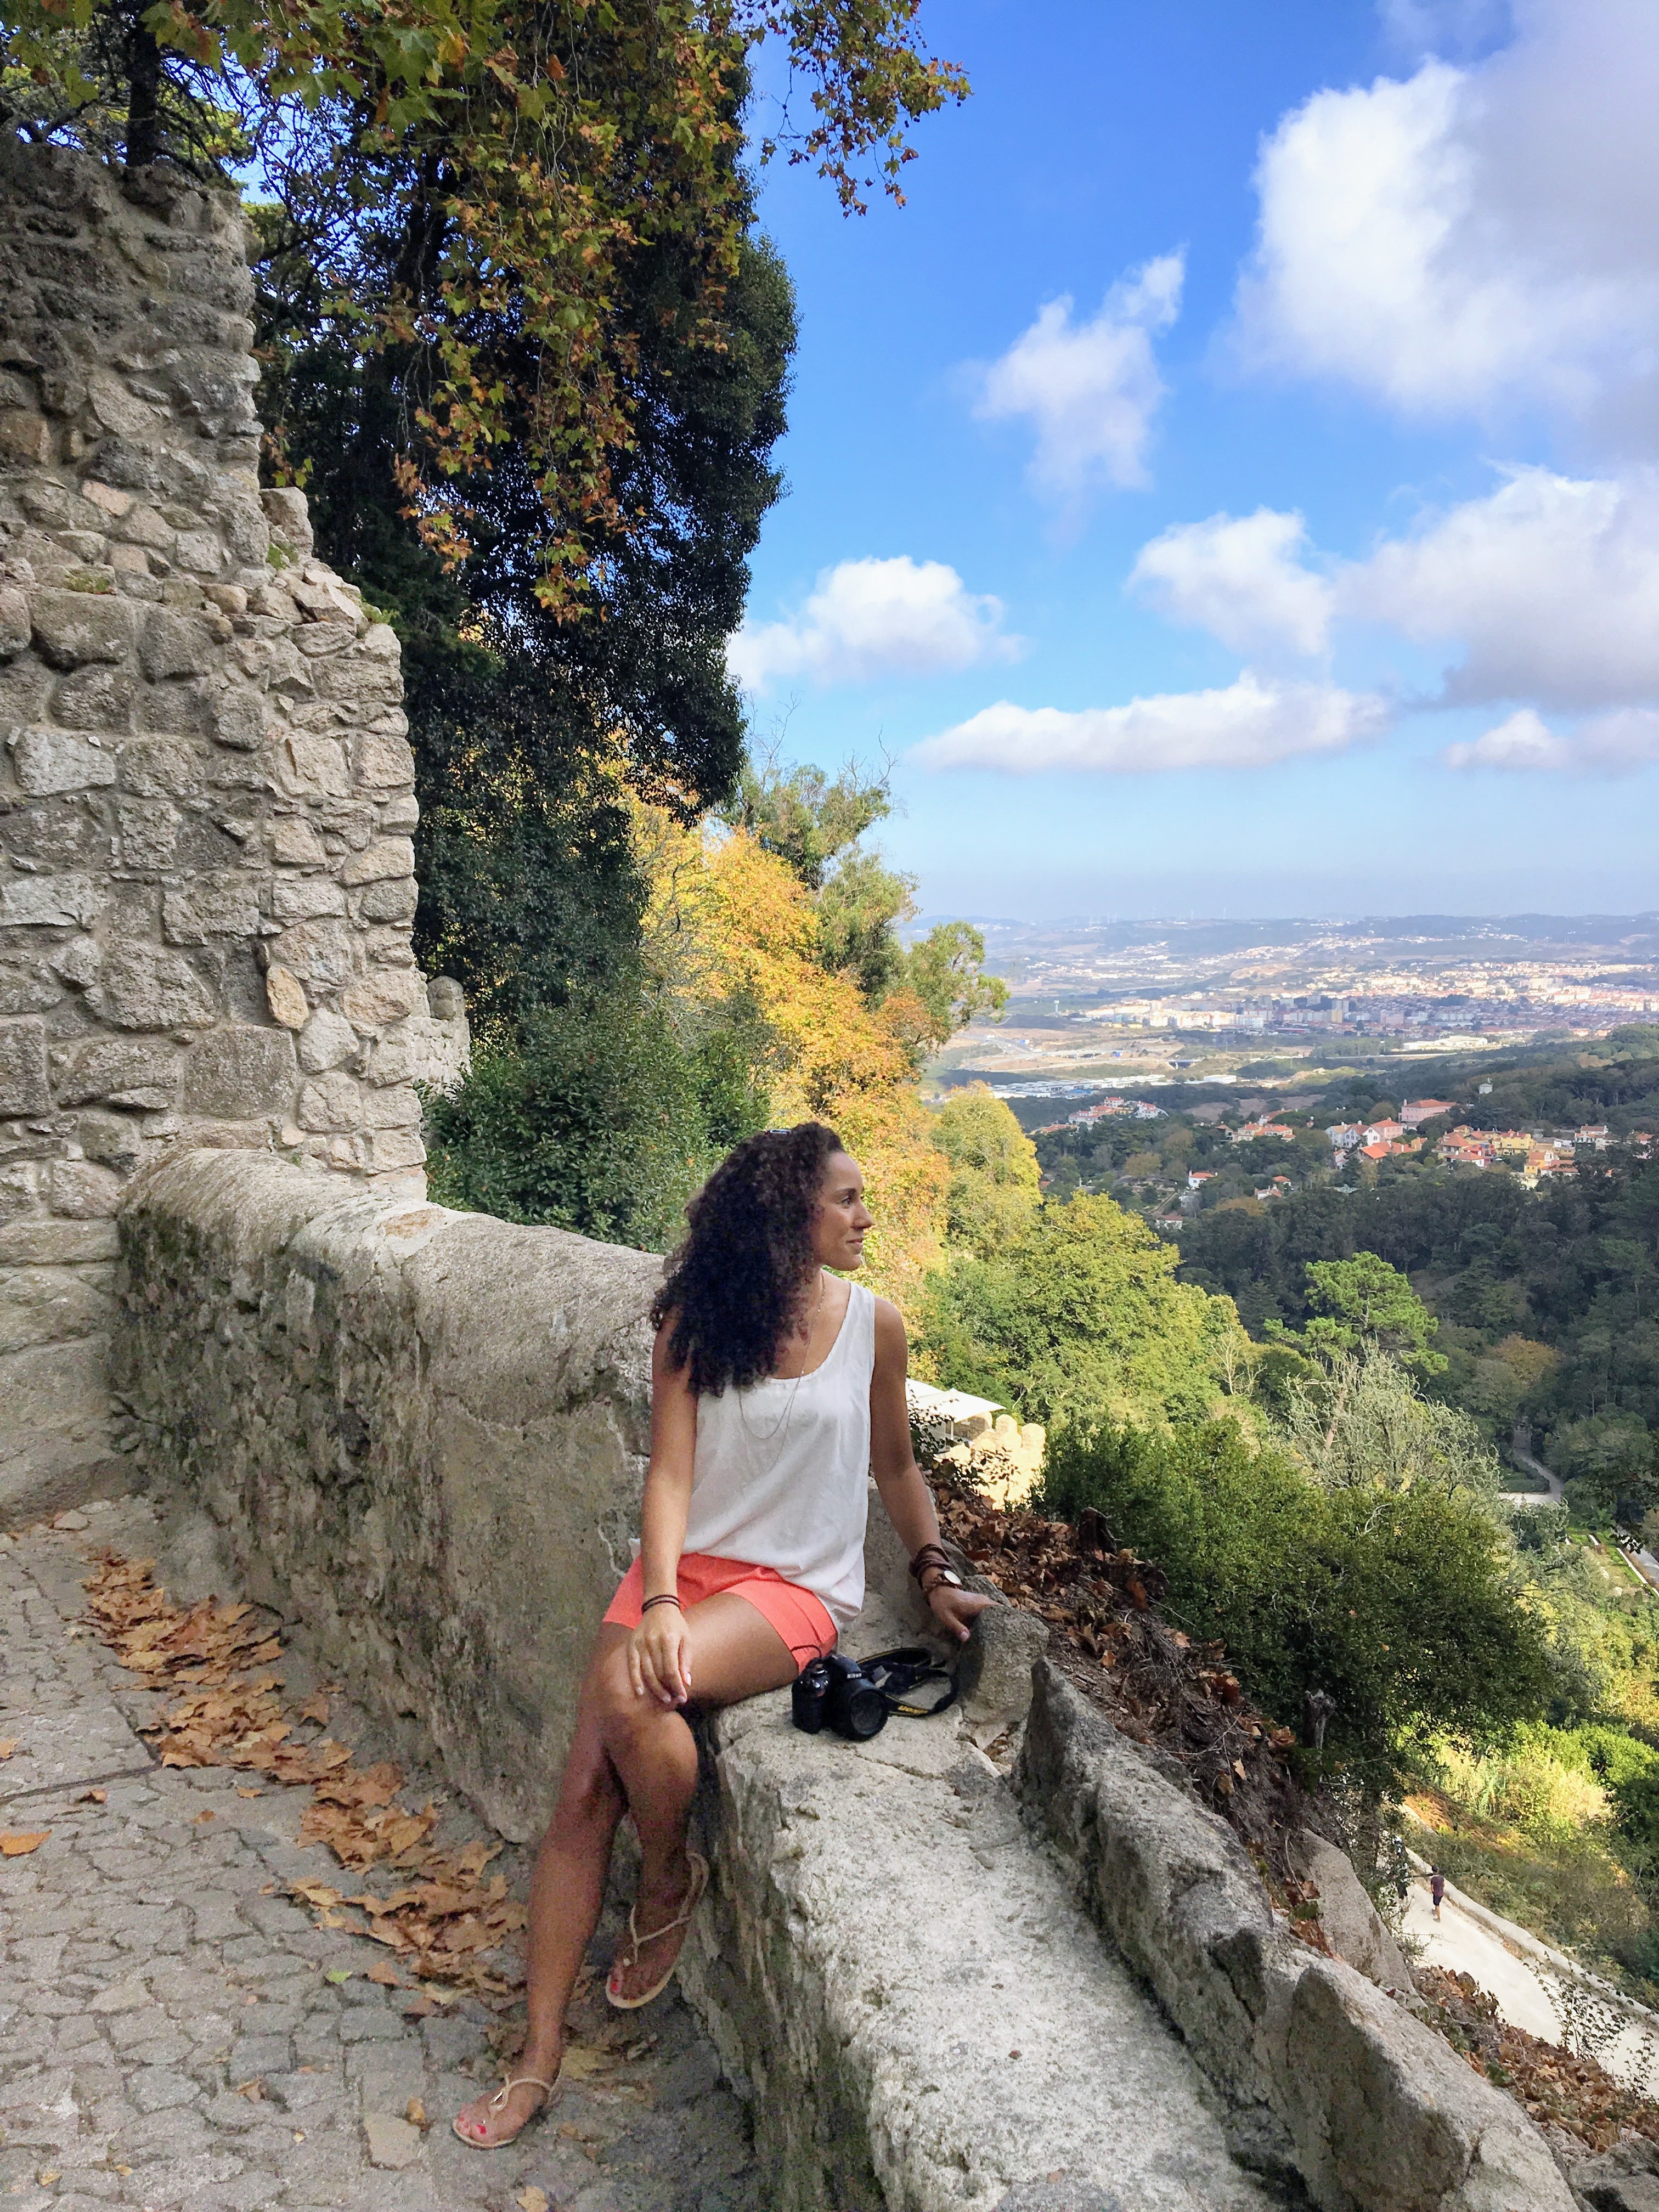 Panoramic view from the Moorish castle in Sintra, Portugal